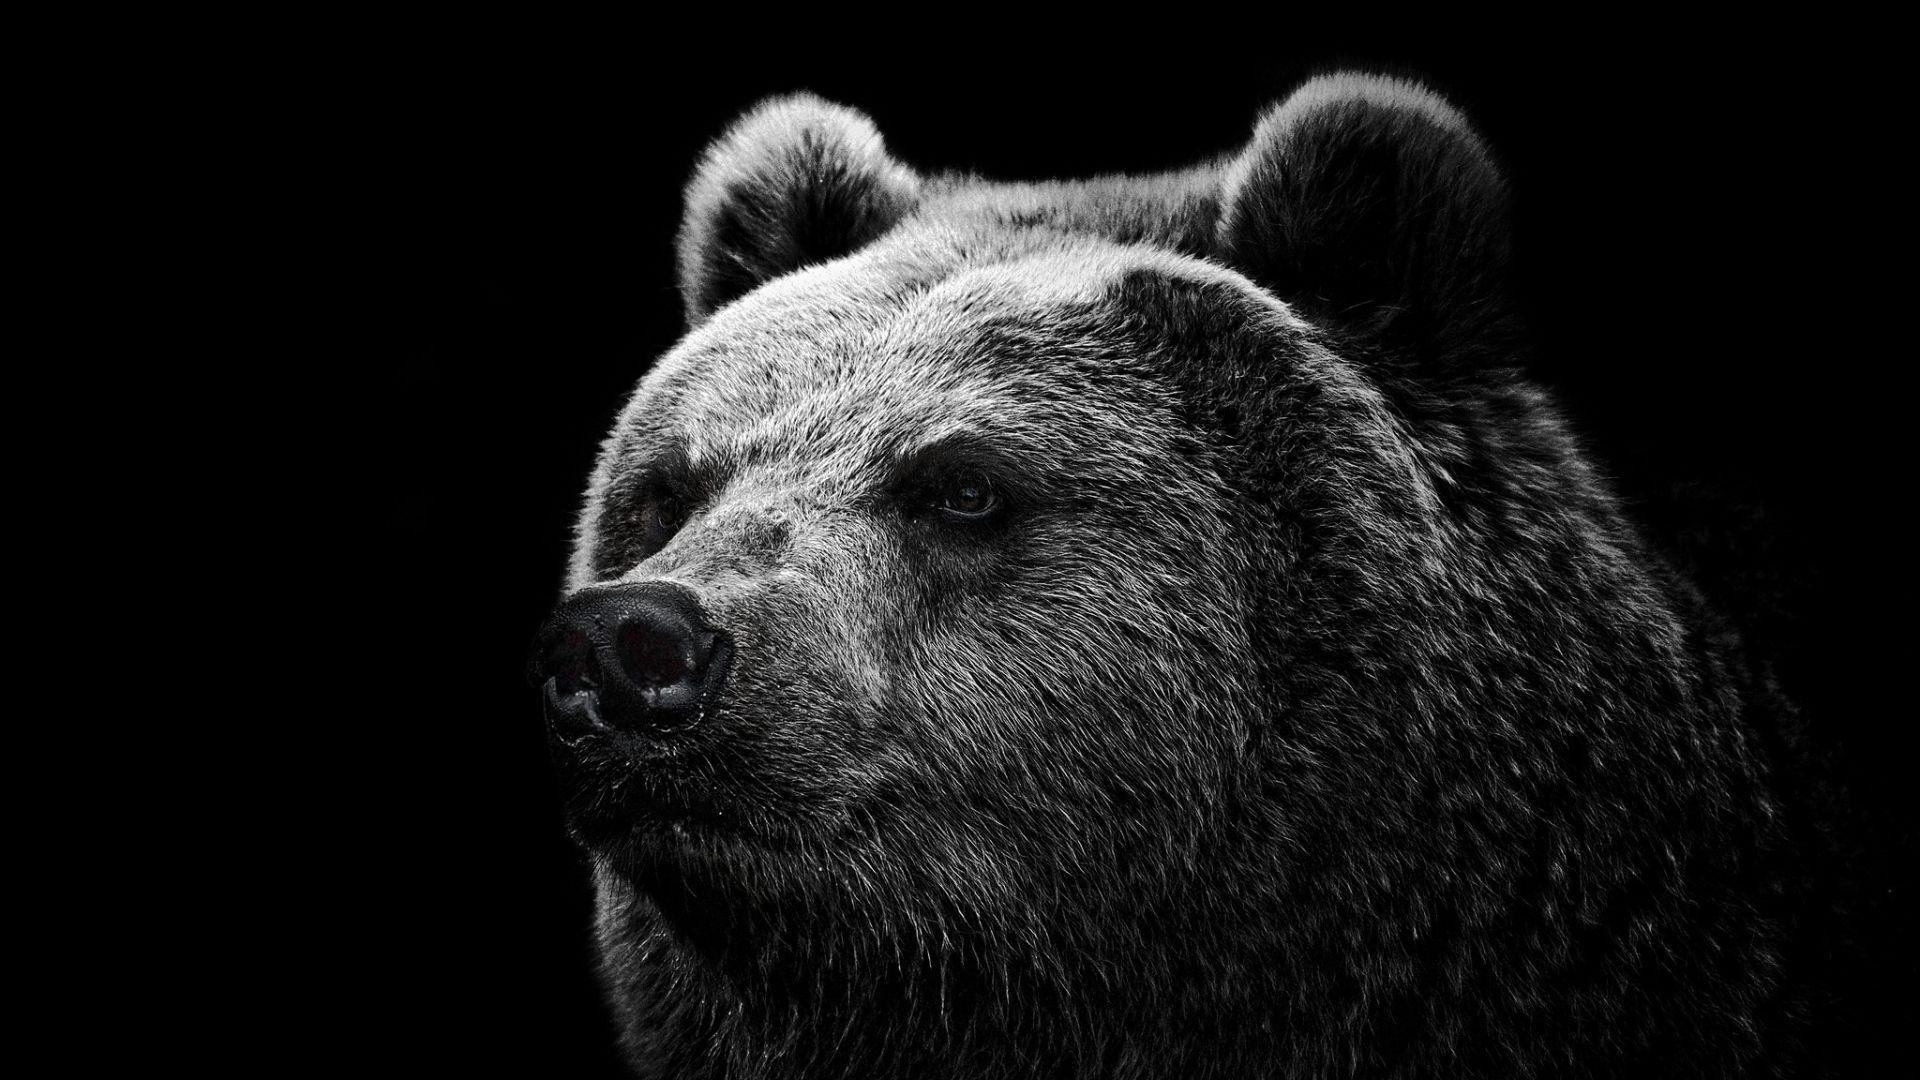 Hd Wallpapers Grizzly Bear Wallpapers Wild Big Grizzly X